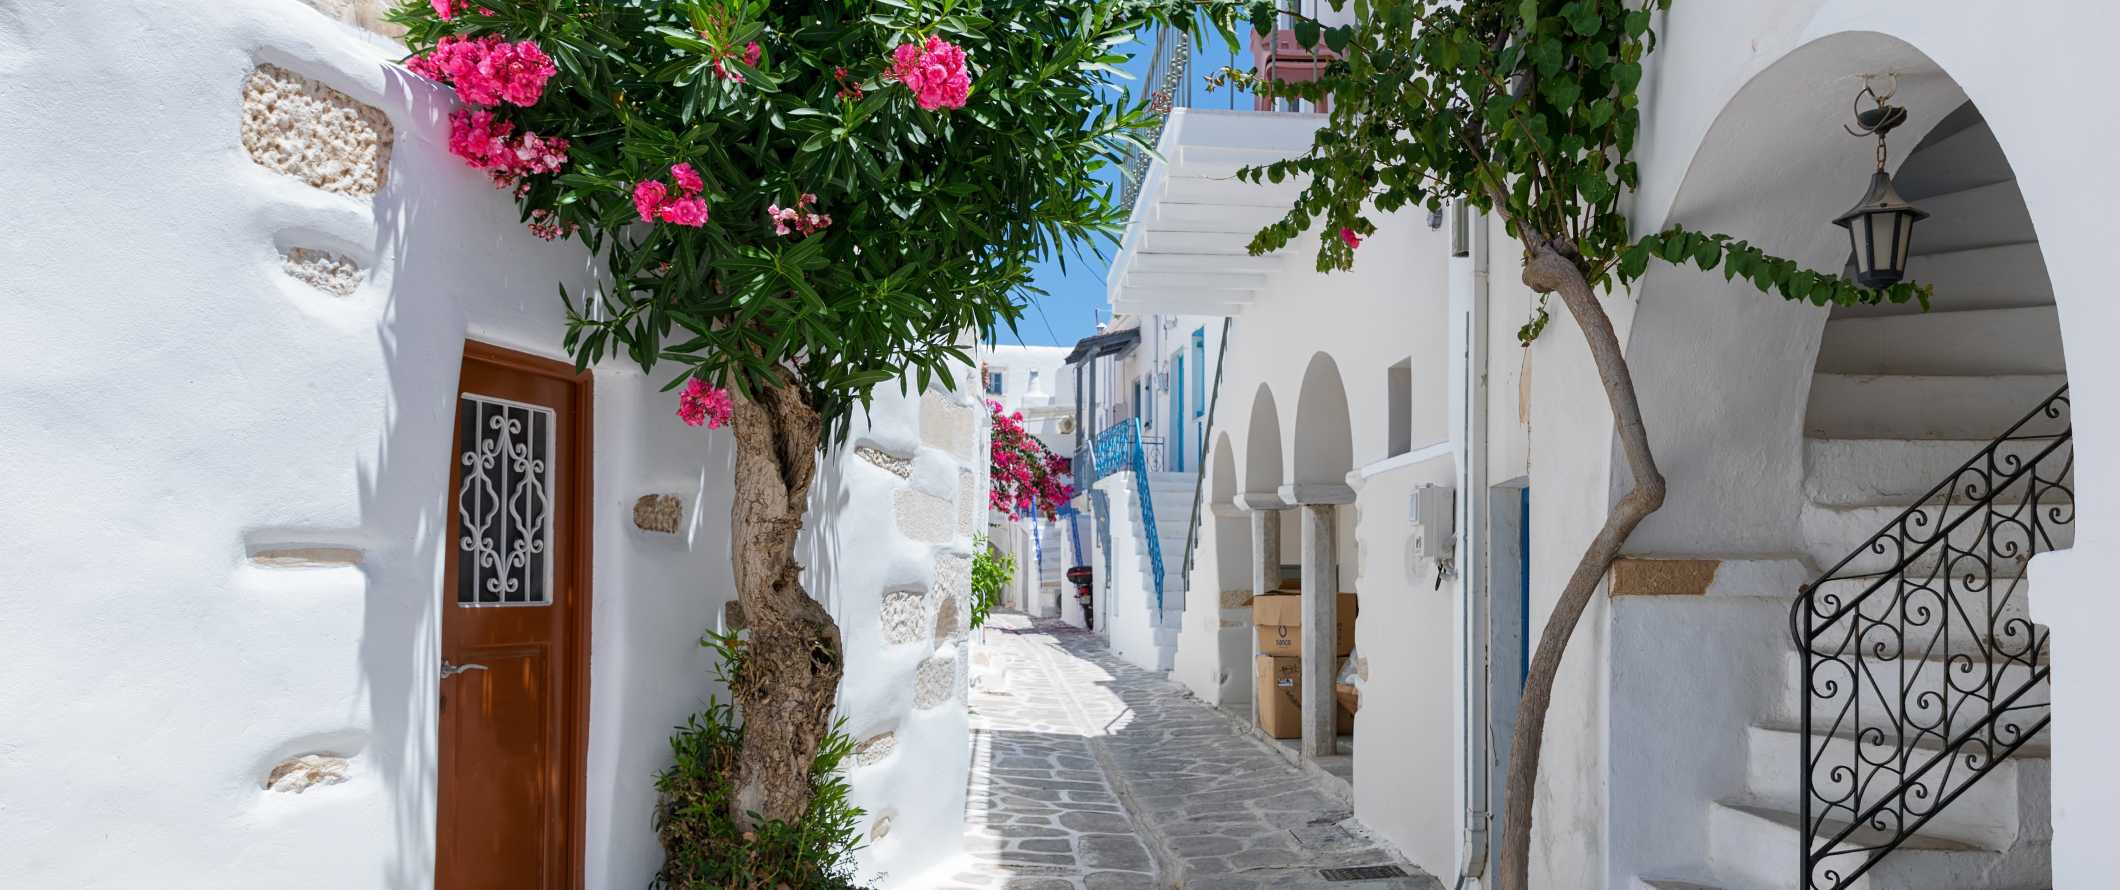 Flag-stone-lined street with white houses on either side on the island of Santorini in Greece.